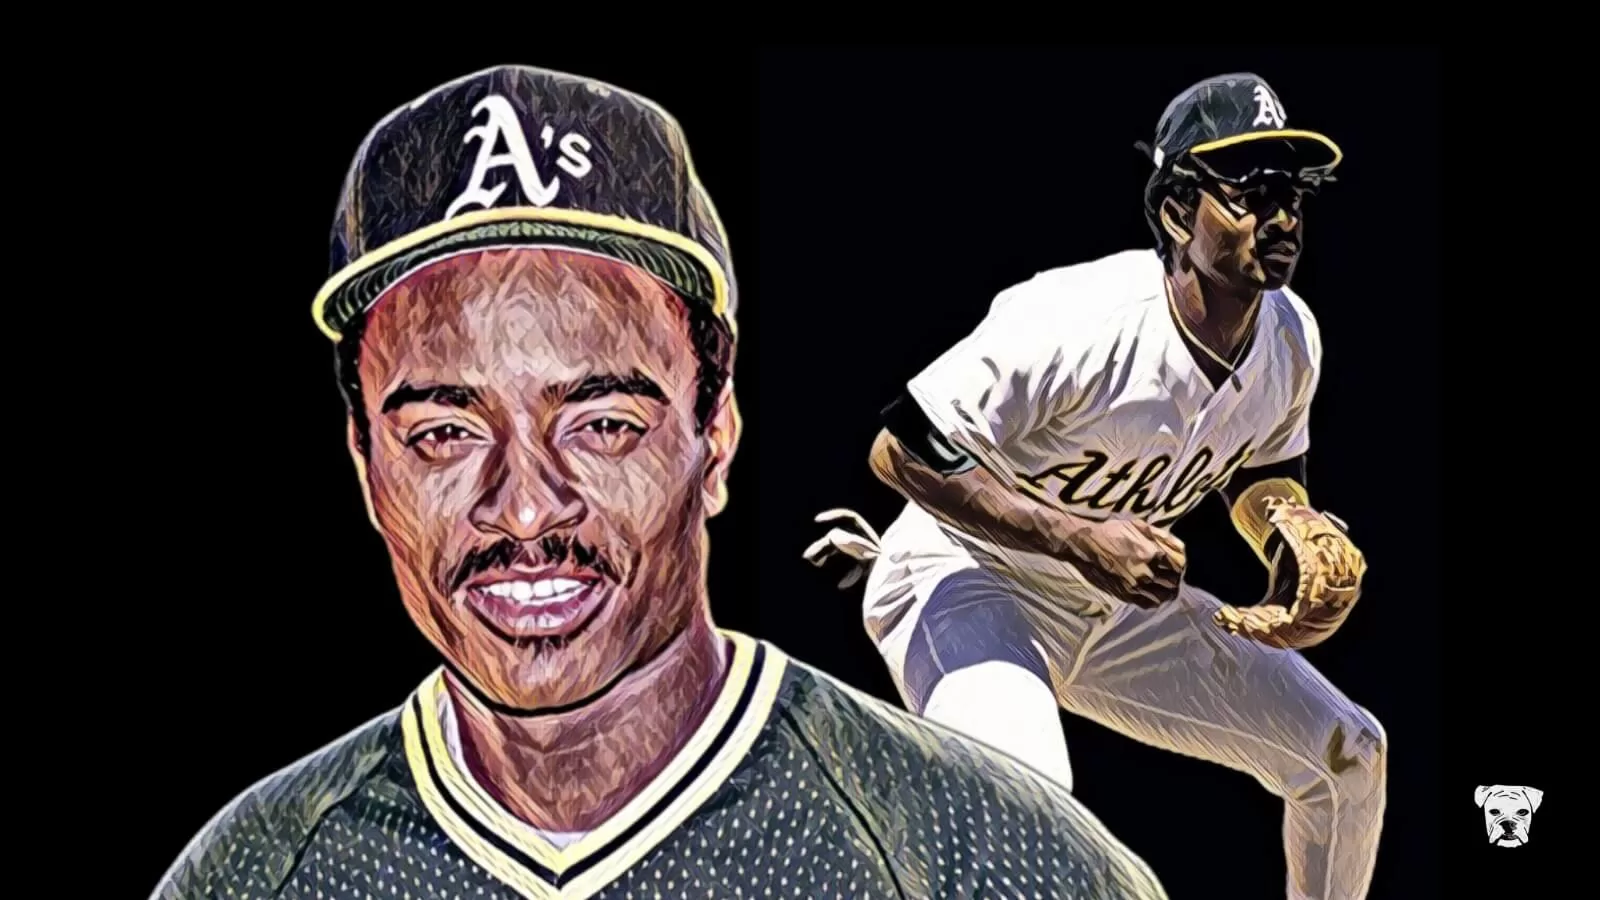 Illustrations of MLB legend Tony Phillips, one of the most underrated utility players in baseball history.